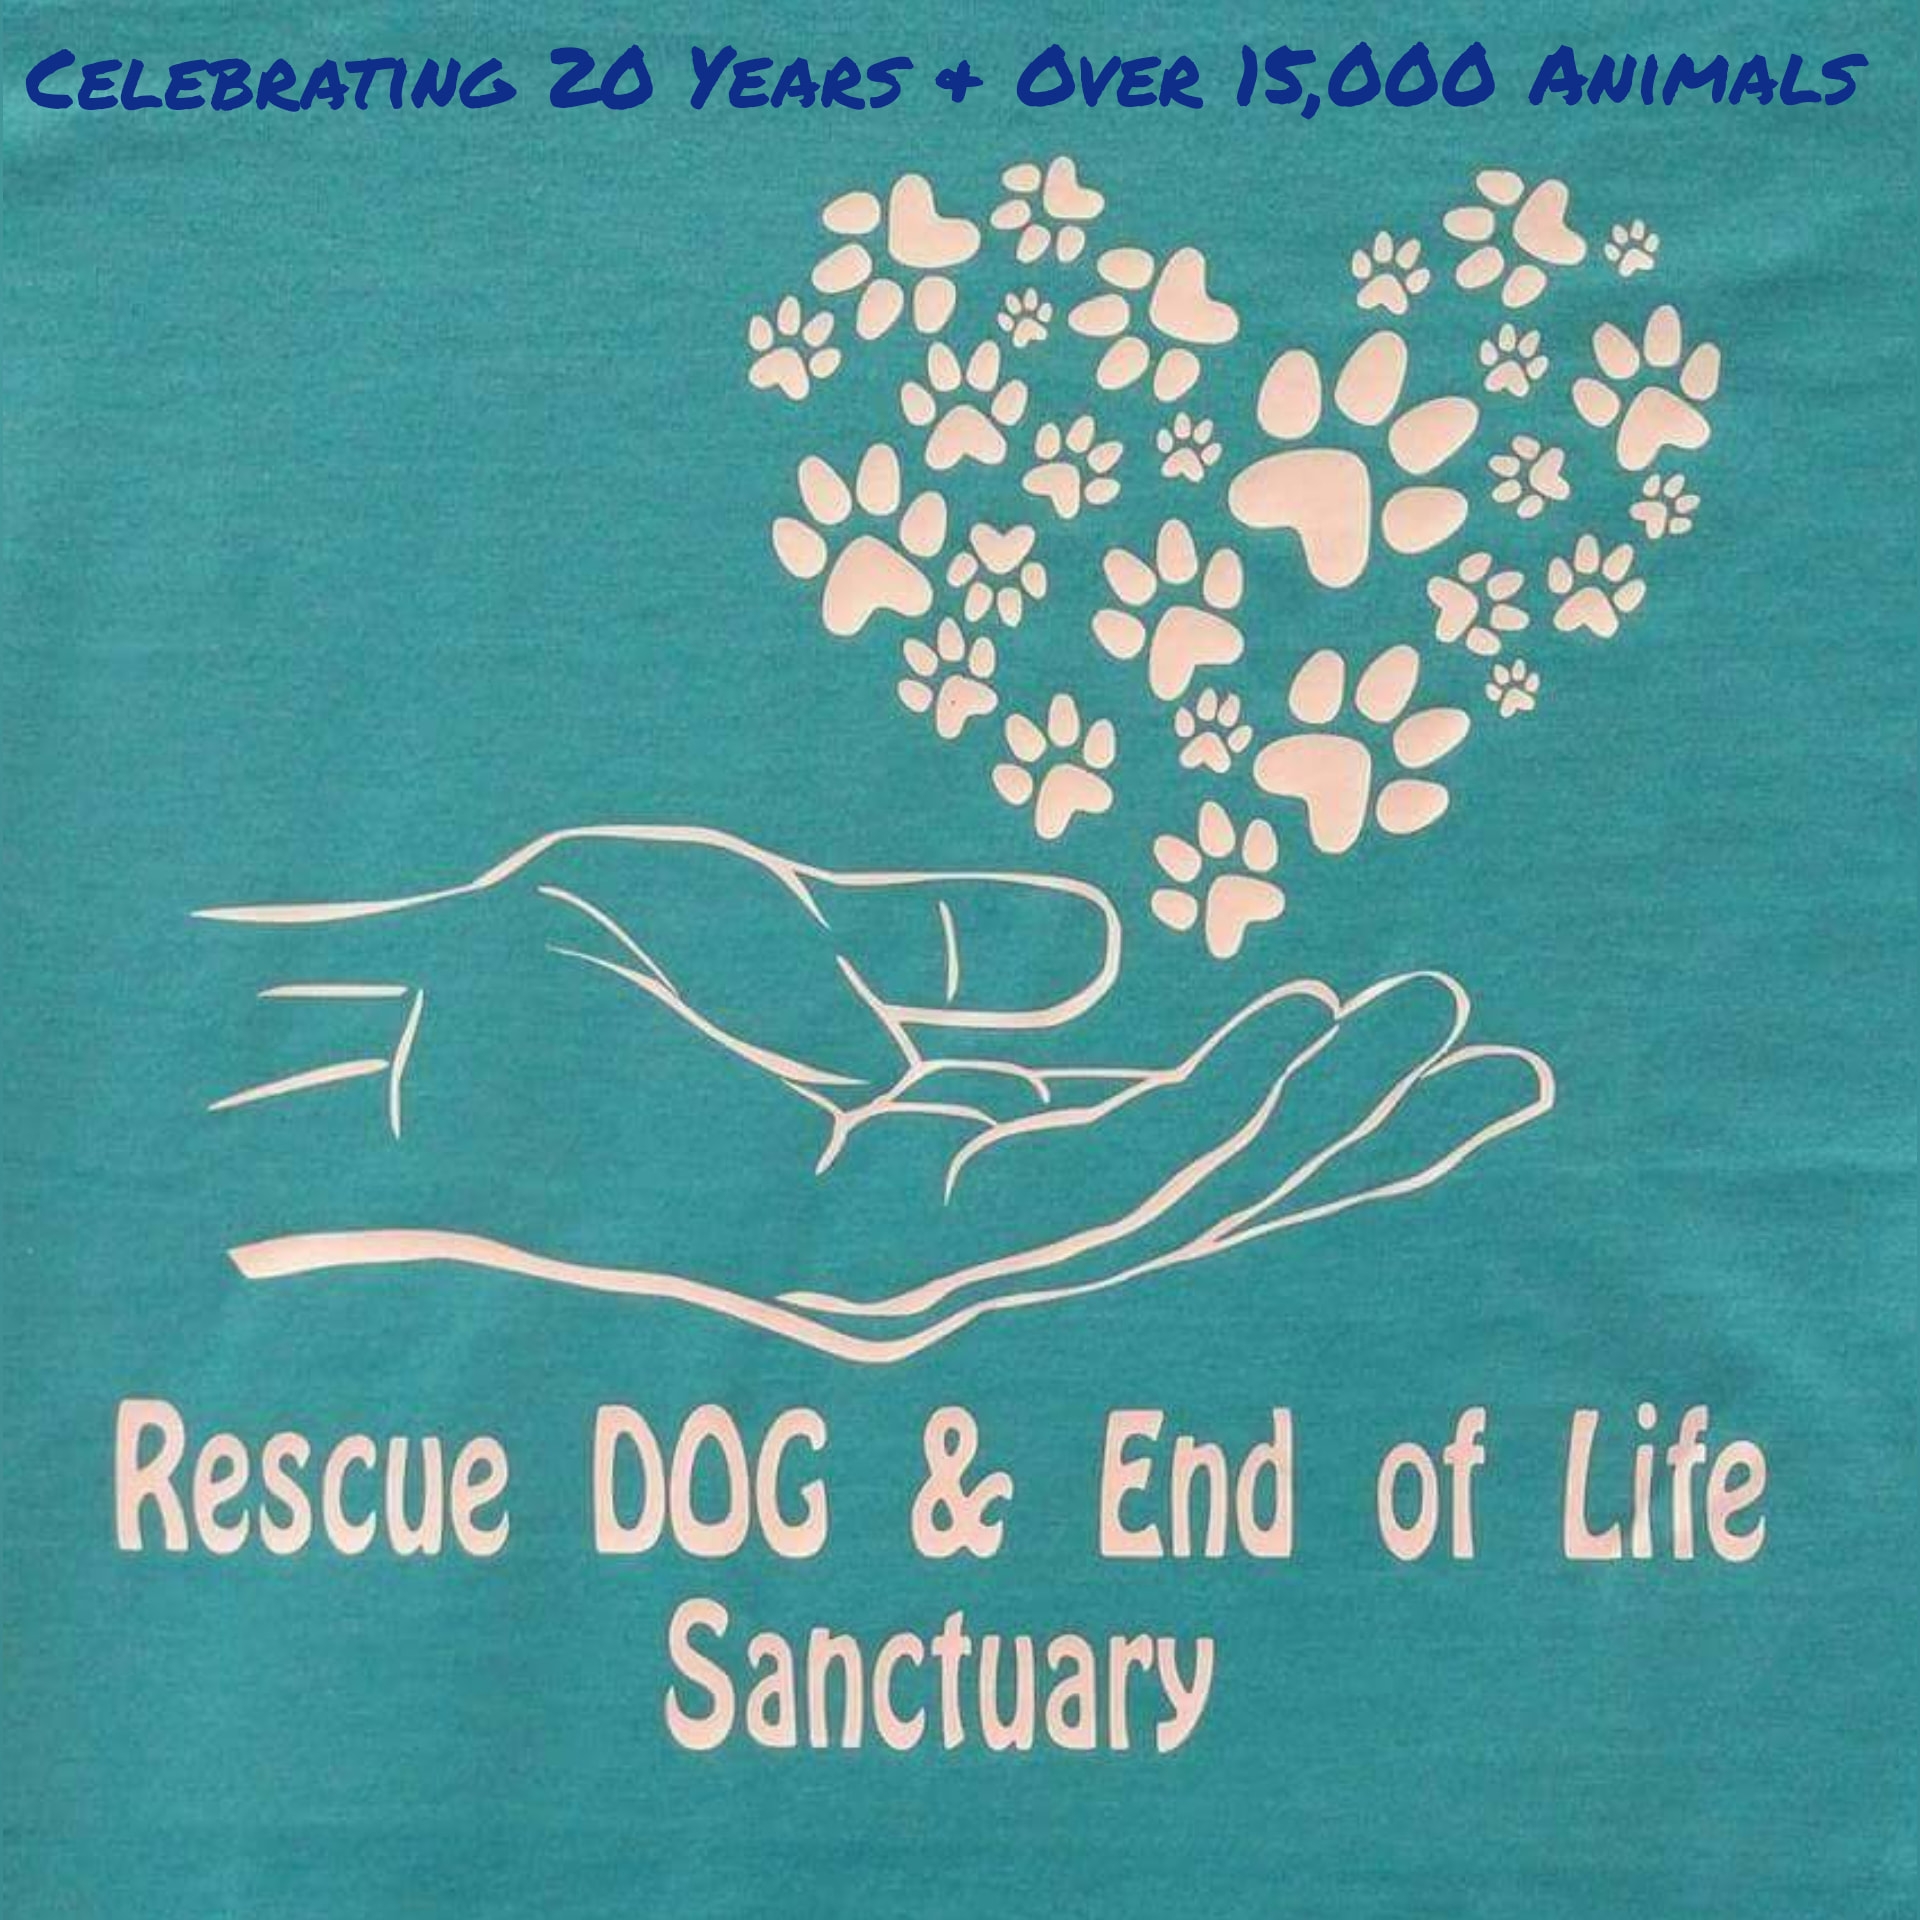 Rescue DOG & End of Life Sanctuary